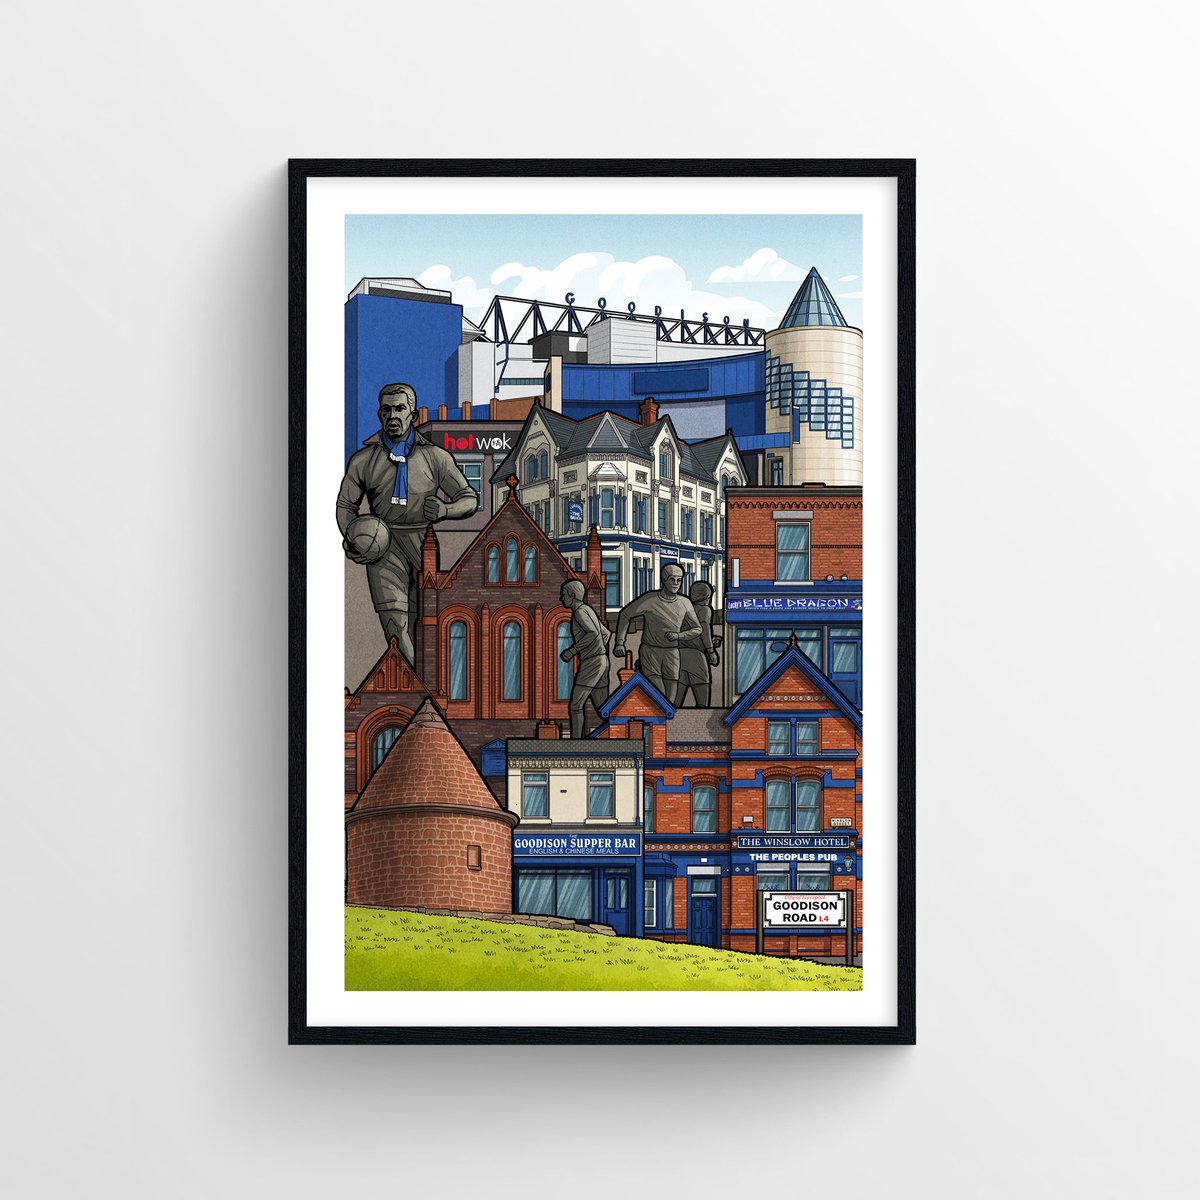 100 plus RTs in less than 40 minutes is crazy blues, thank you so much for the love for this piece which is now live!

Find the link below, please RT again. 🥳 #Everton #EFC #GoodisonPark